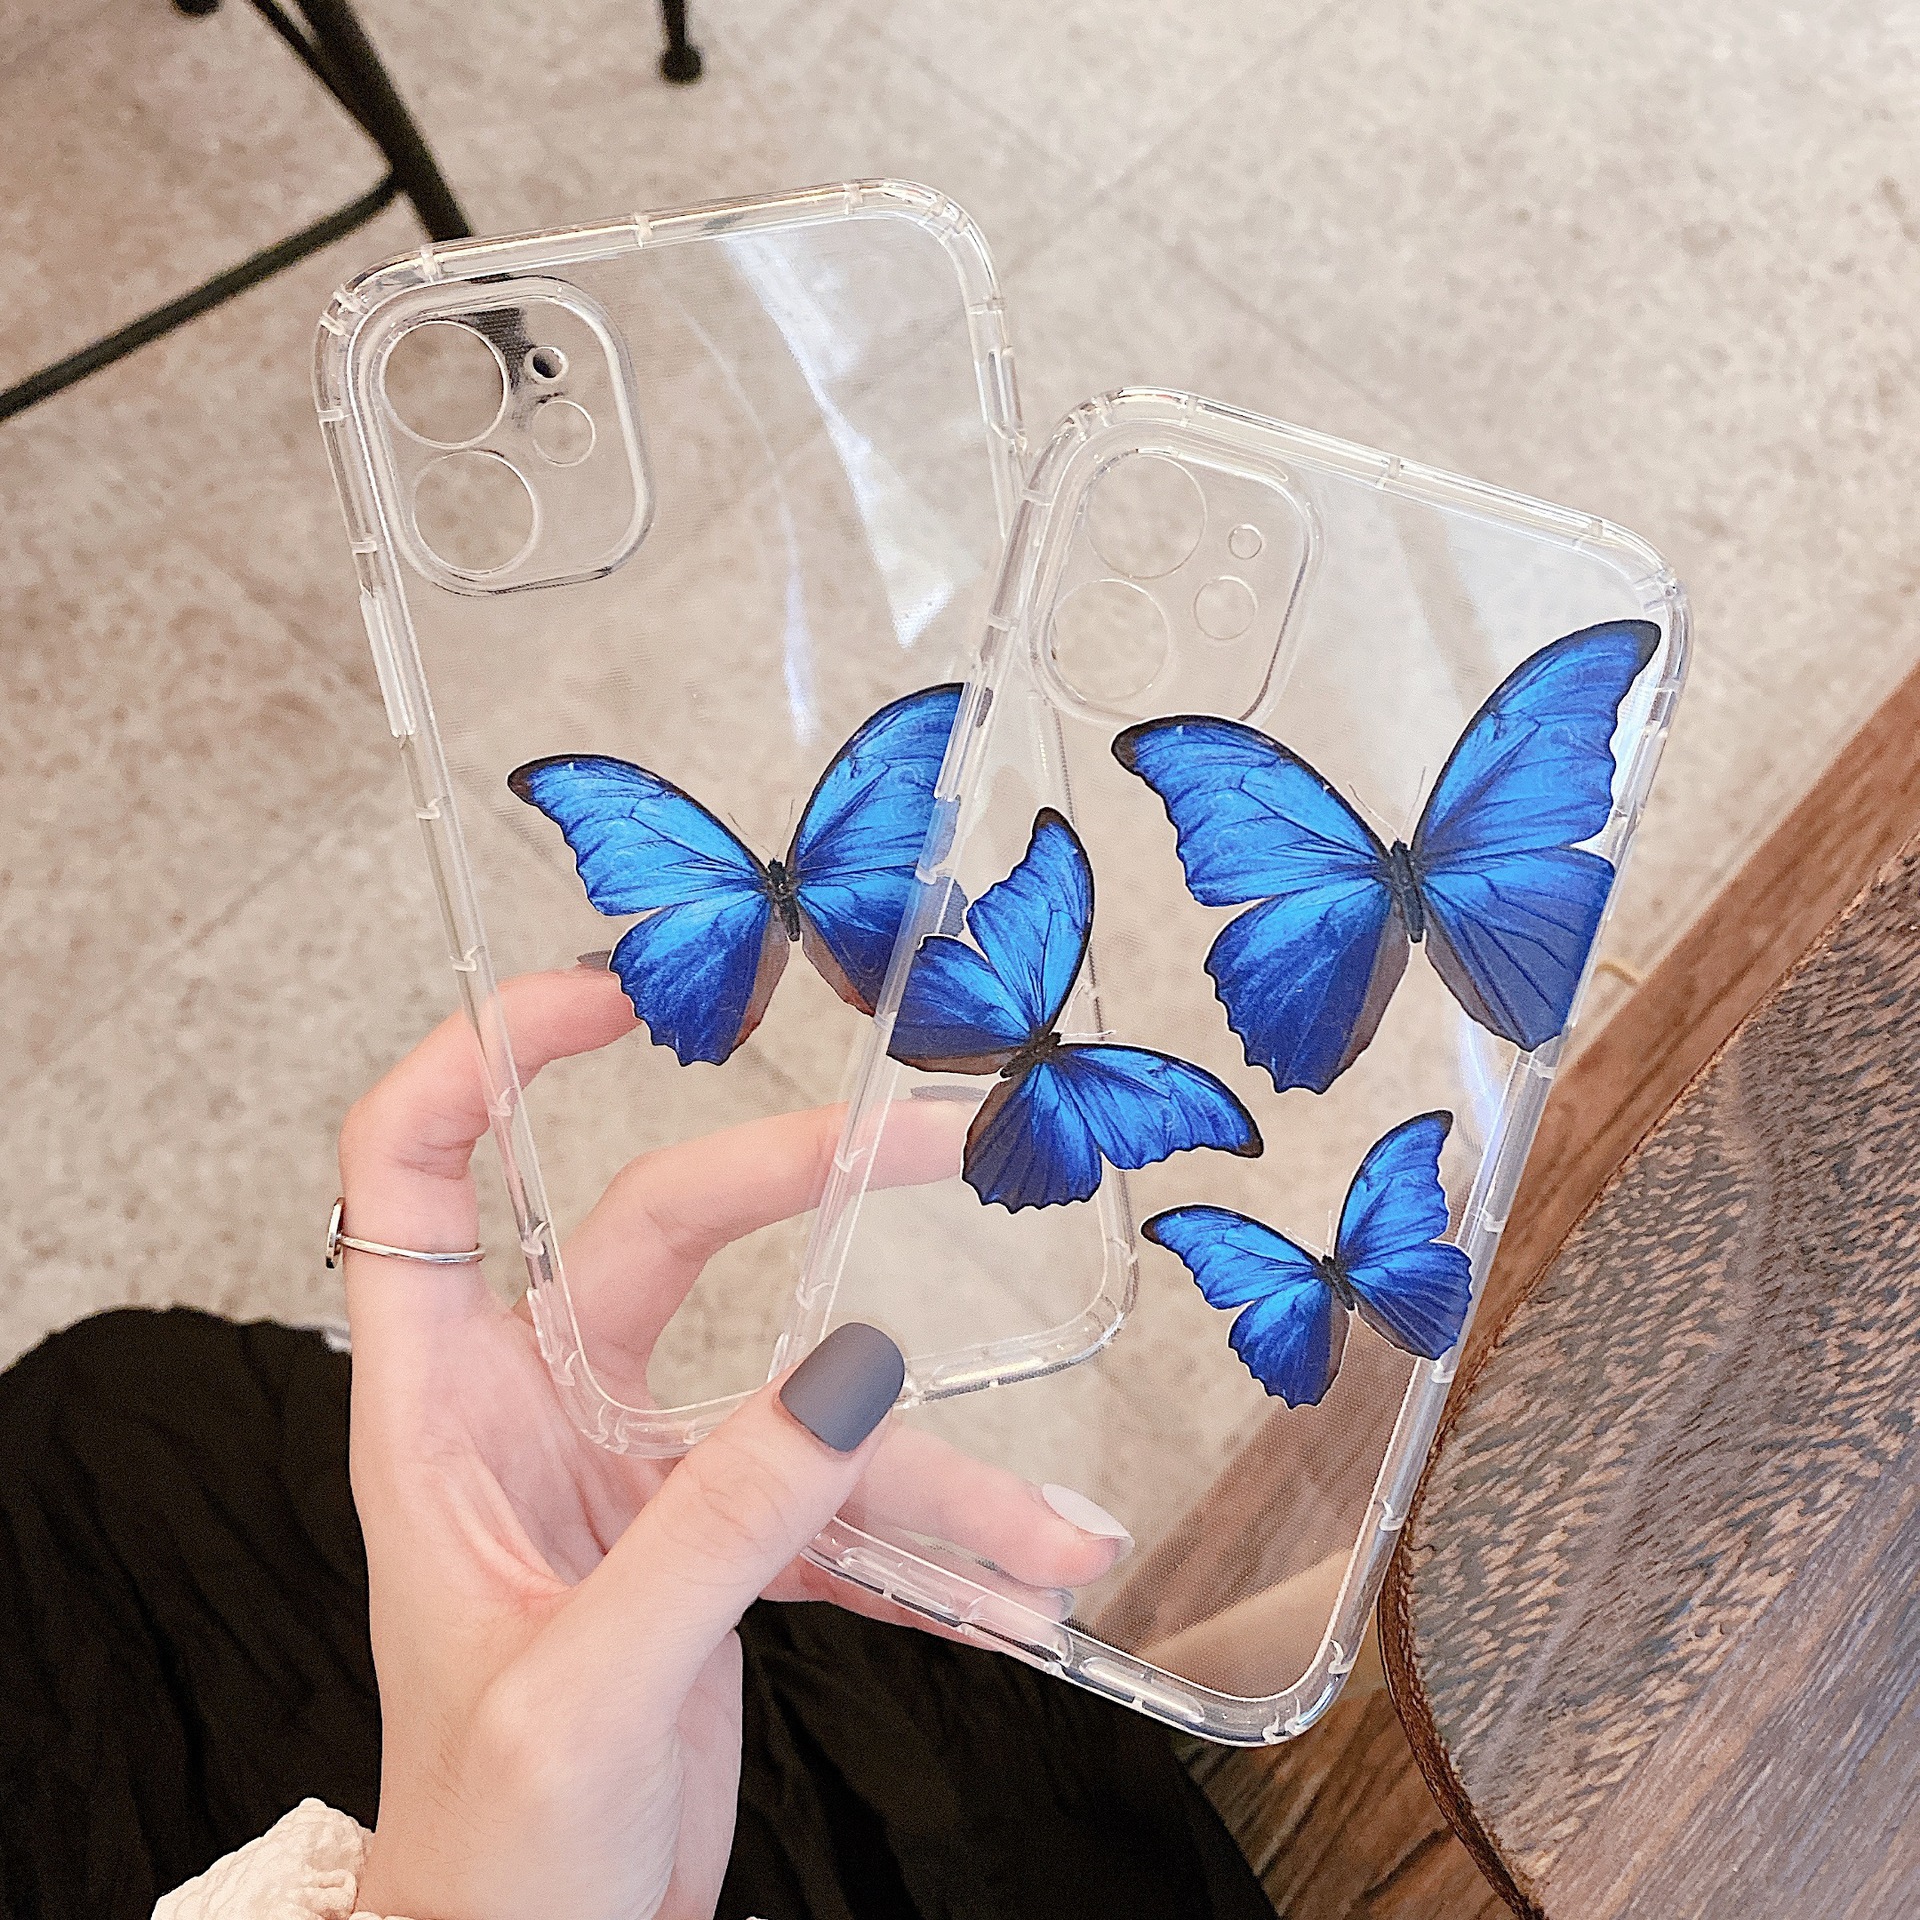 Transparent Printed Silicone Phone Case for iPhone